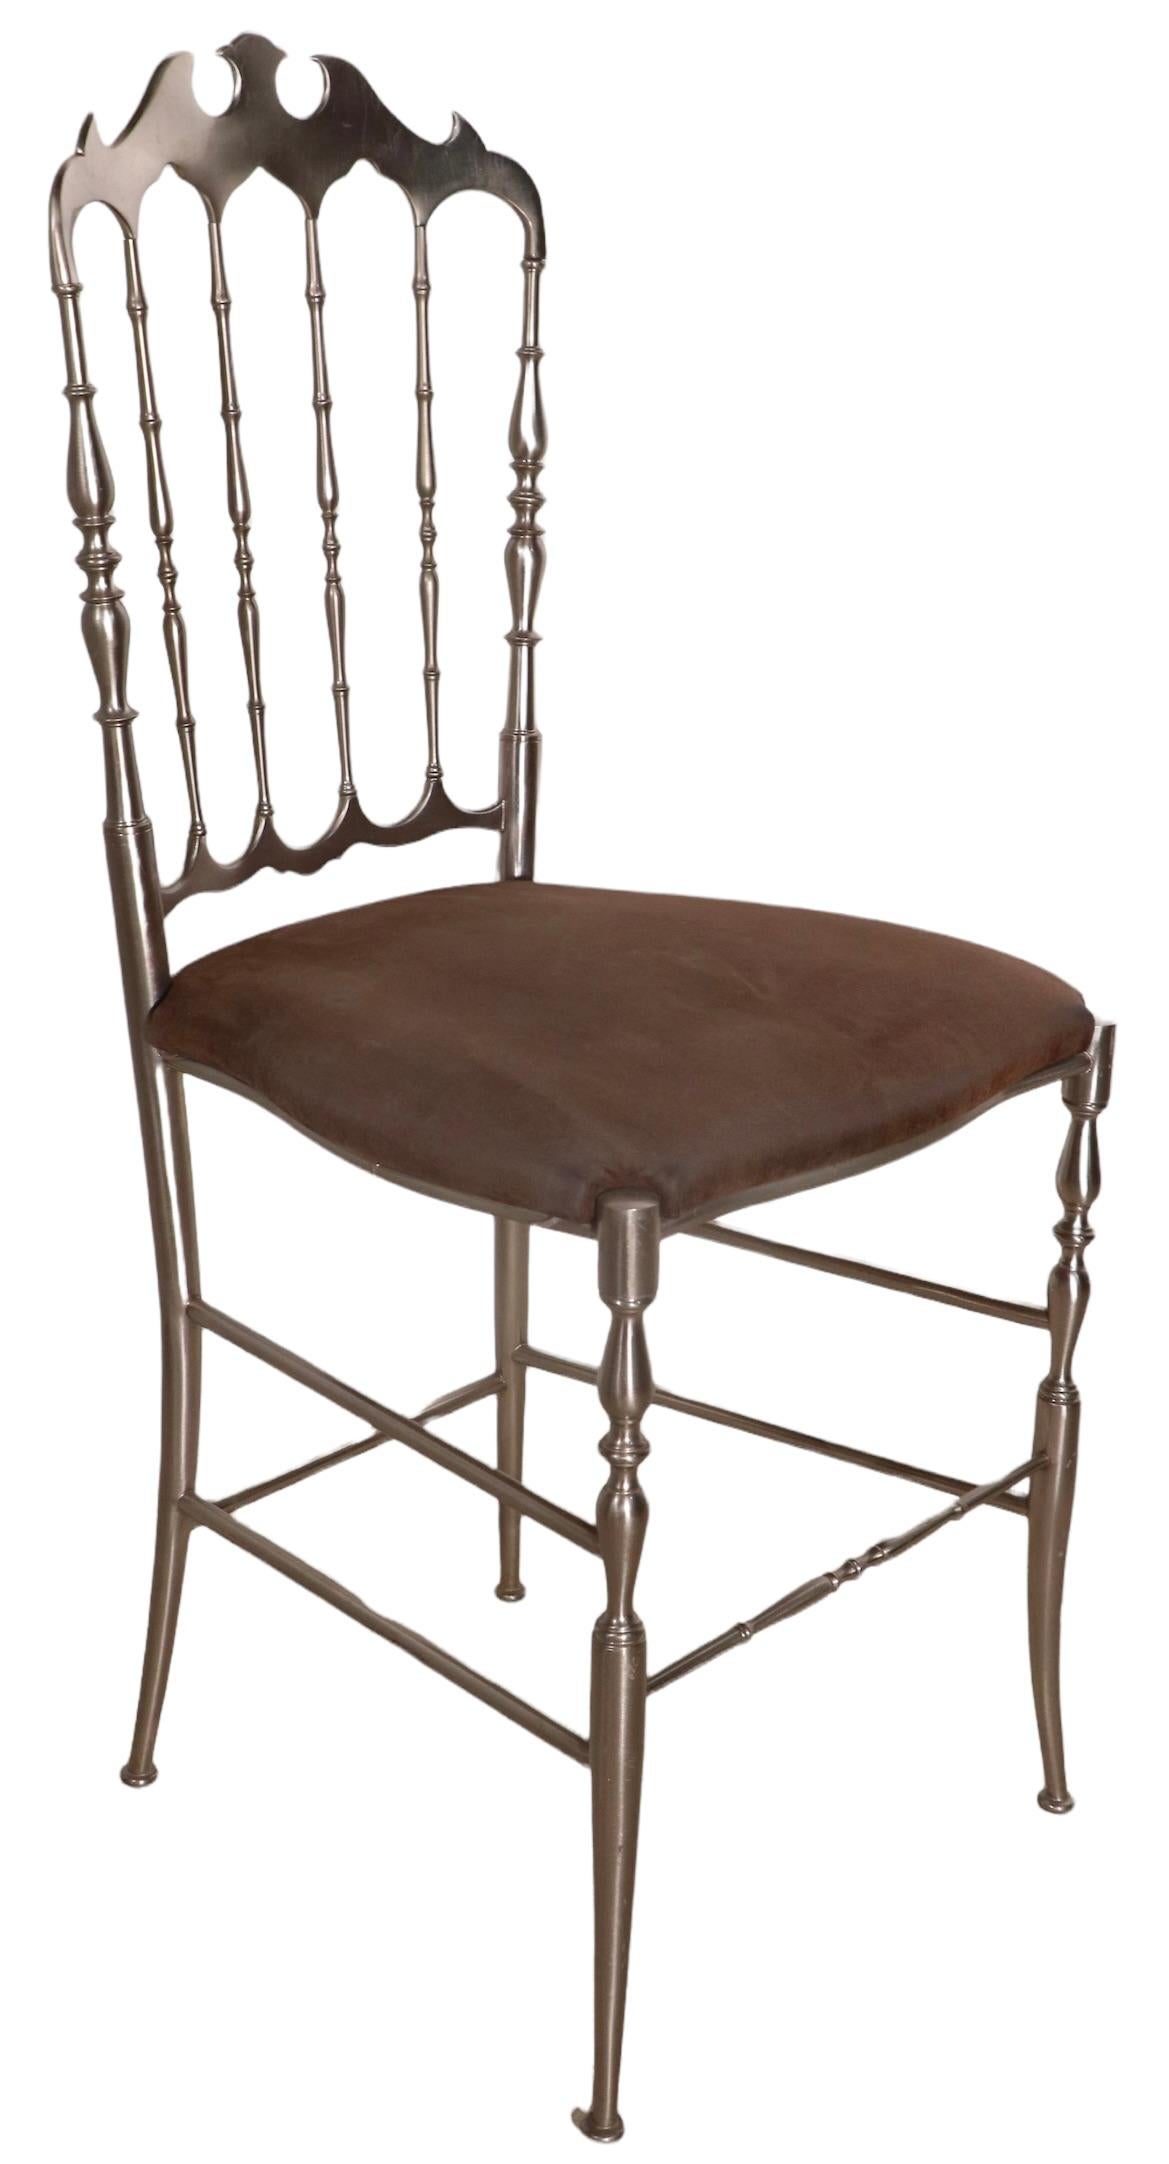 Set of Charivari Chairs in Steel Finish from Made in Italy retailed by WJ Sloane For Sale 2